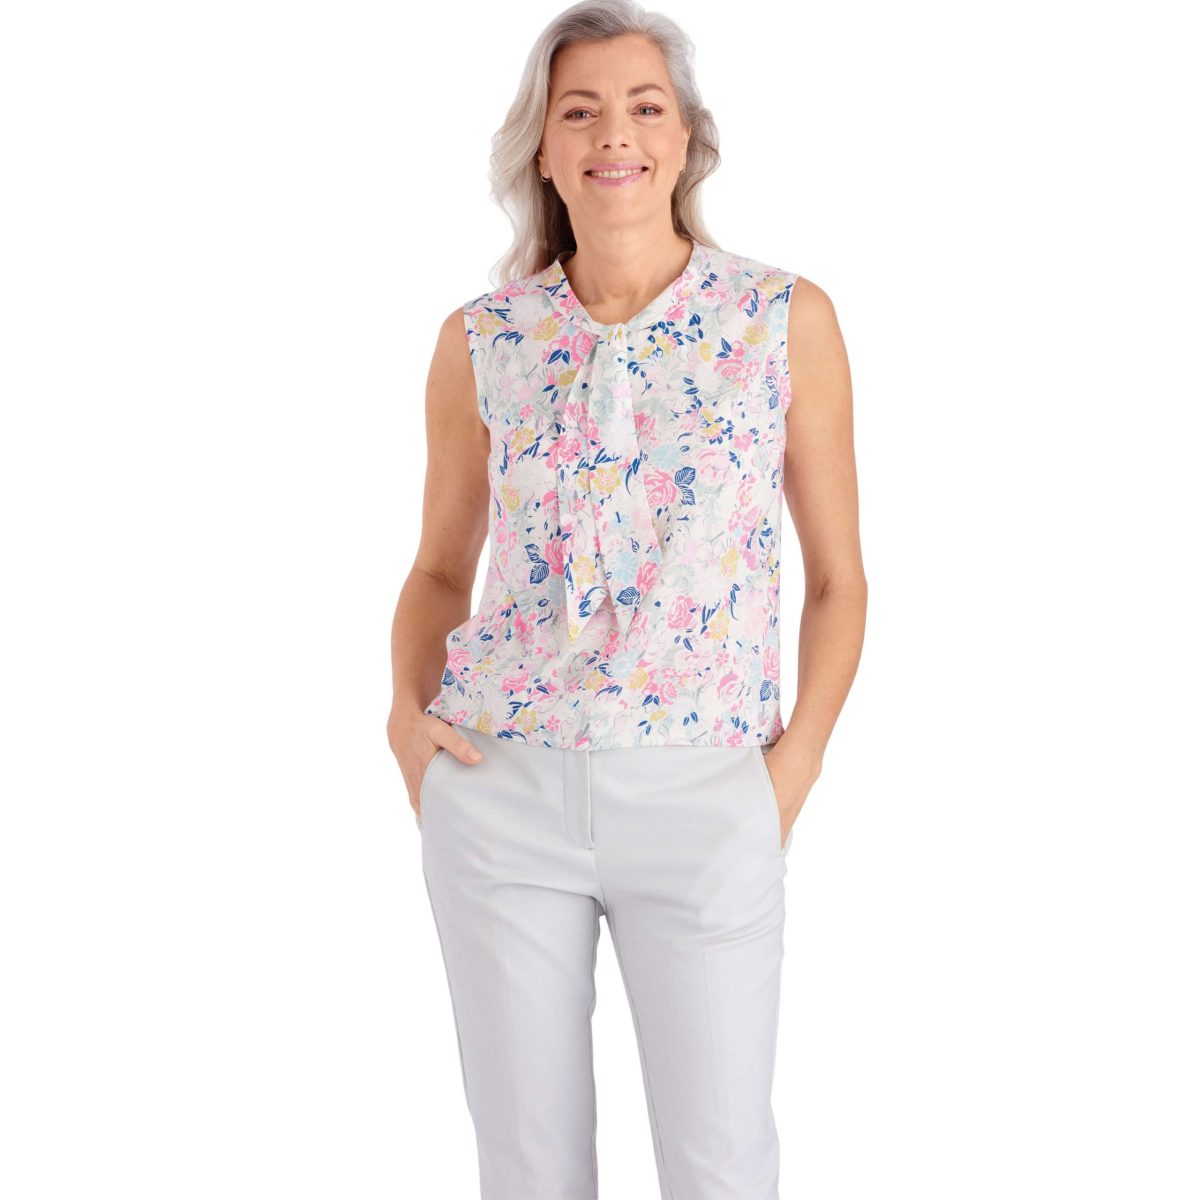 Simplicity Sewing Pattern S9579 Misses' Adaptive Tops